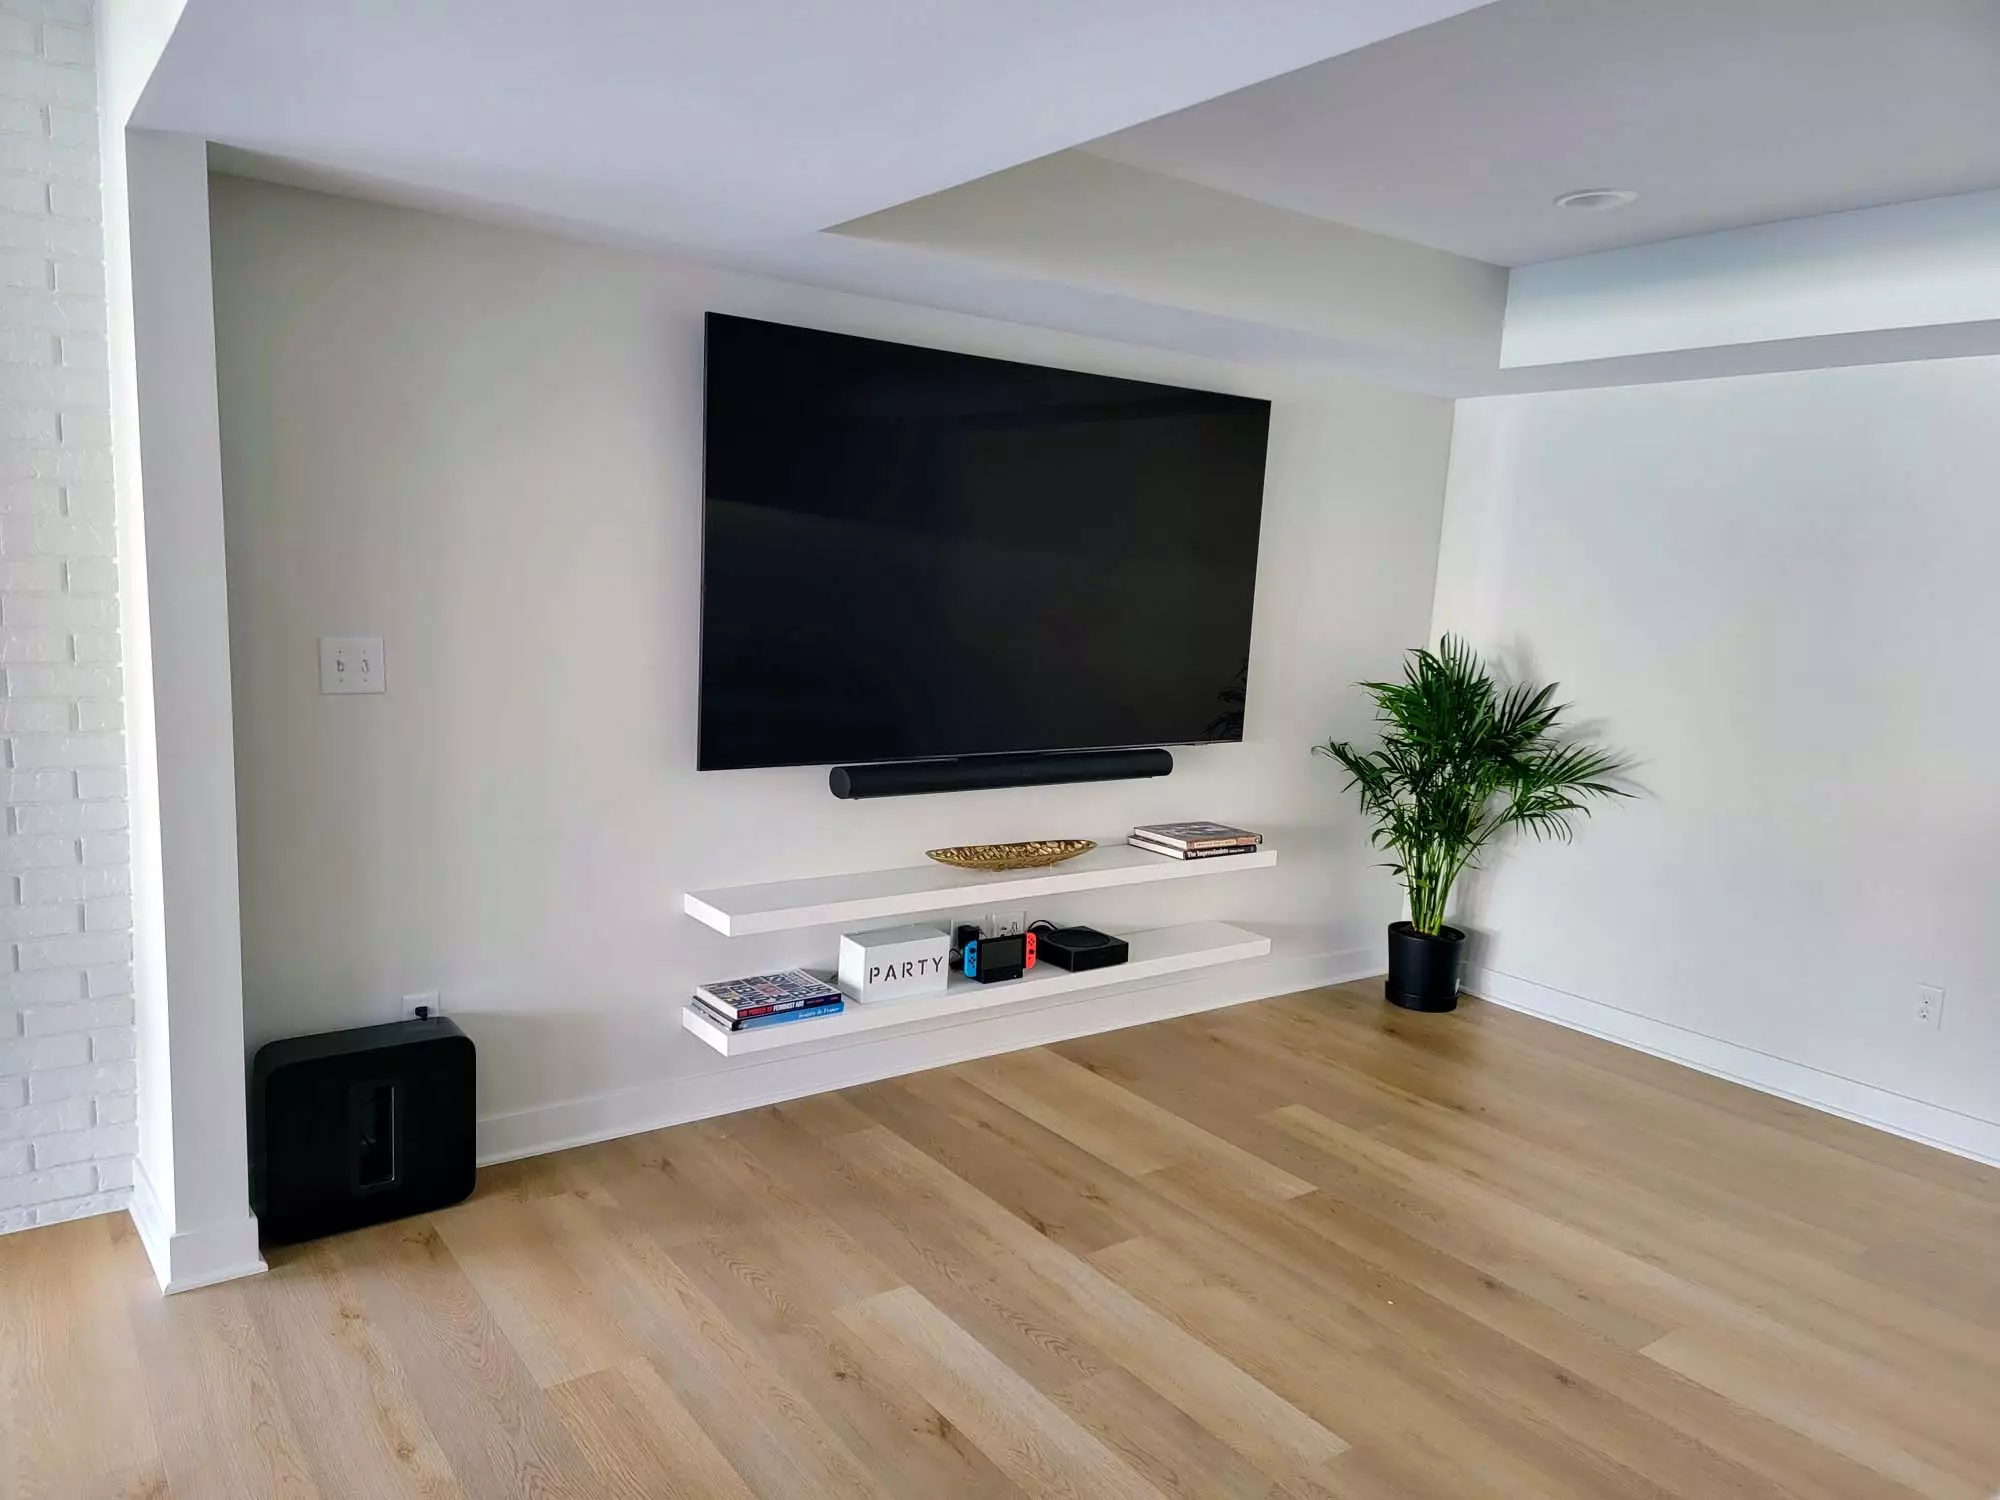 Media wall with floating shelves